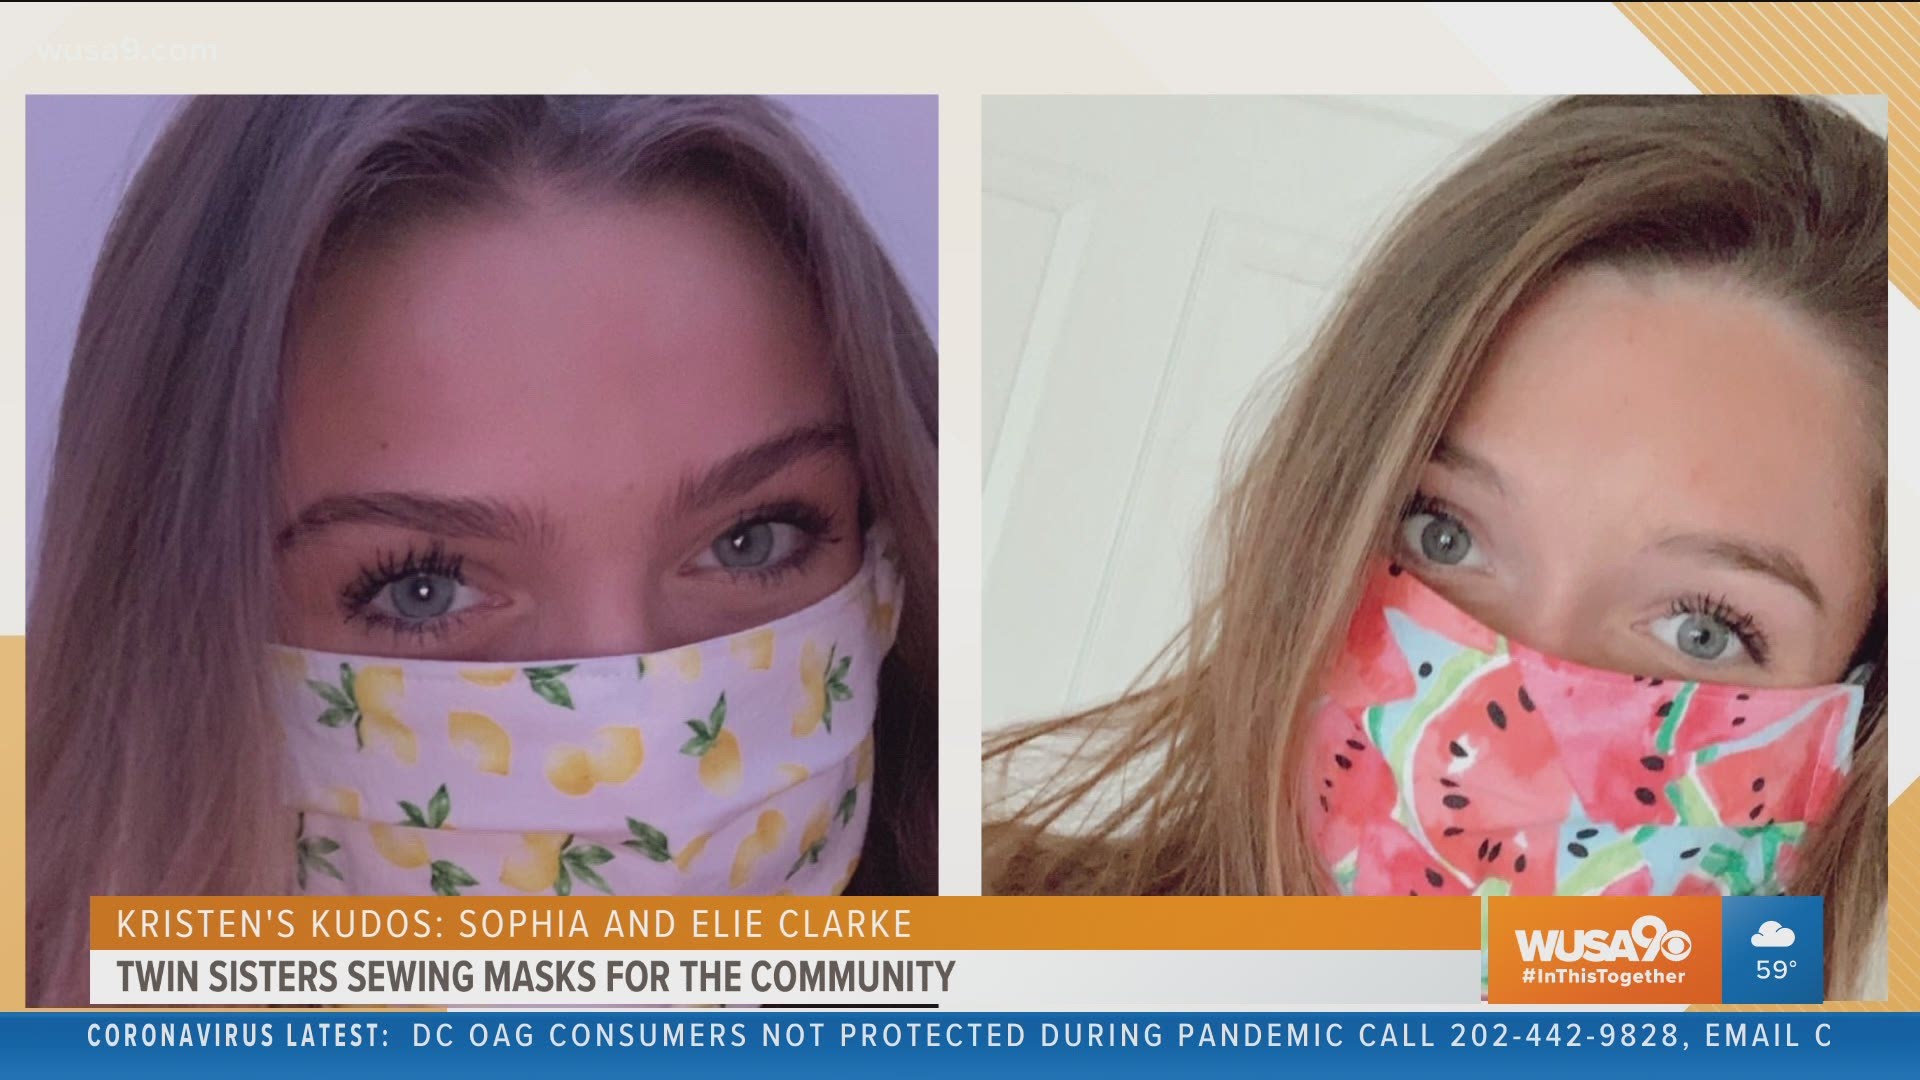 Kristen's Kudos goes to Sophia and Elie Clarke from Ashburn, VA are making  masks for people in need.